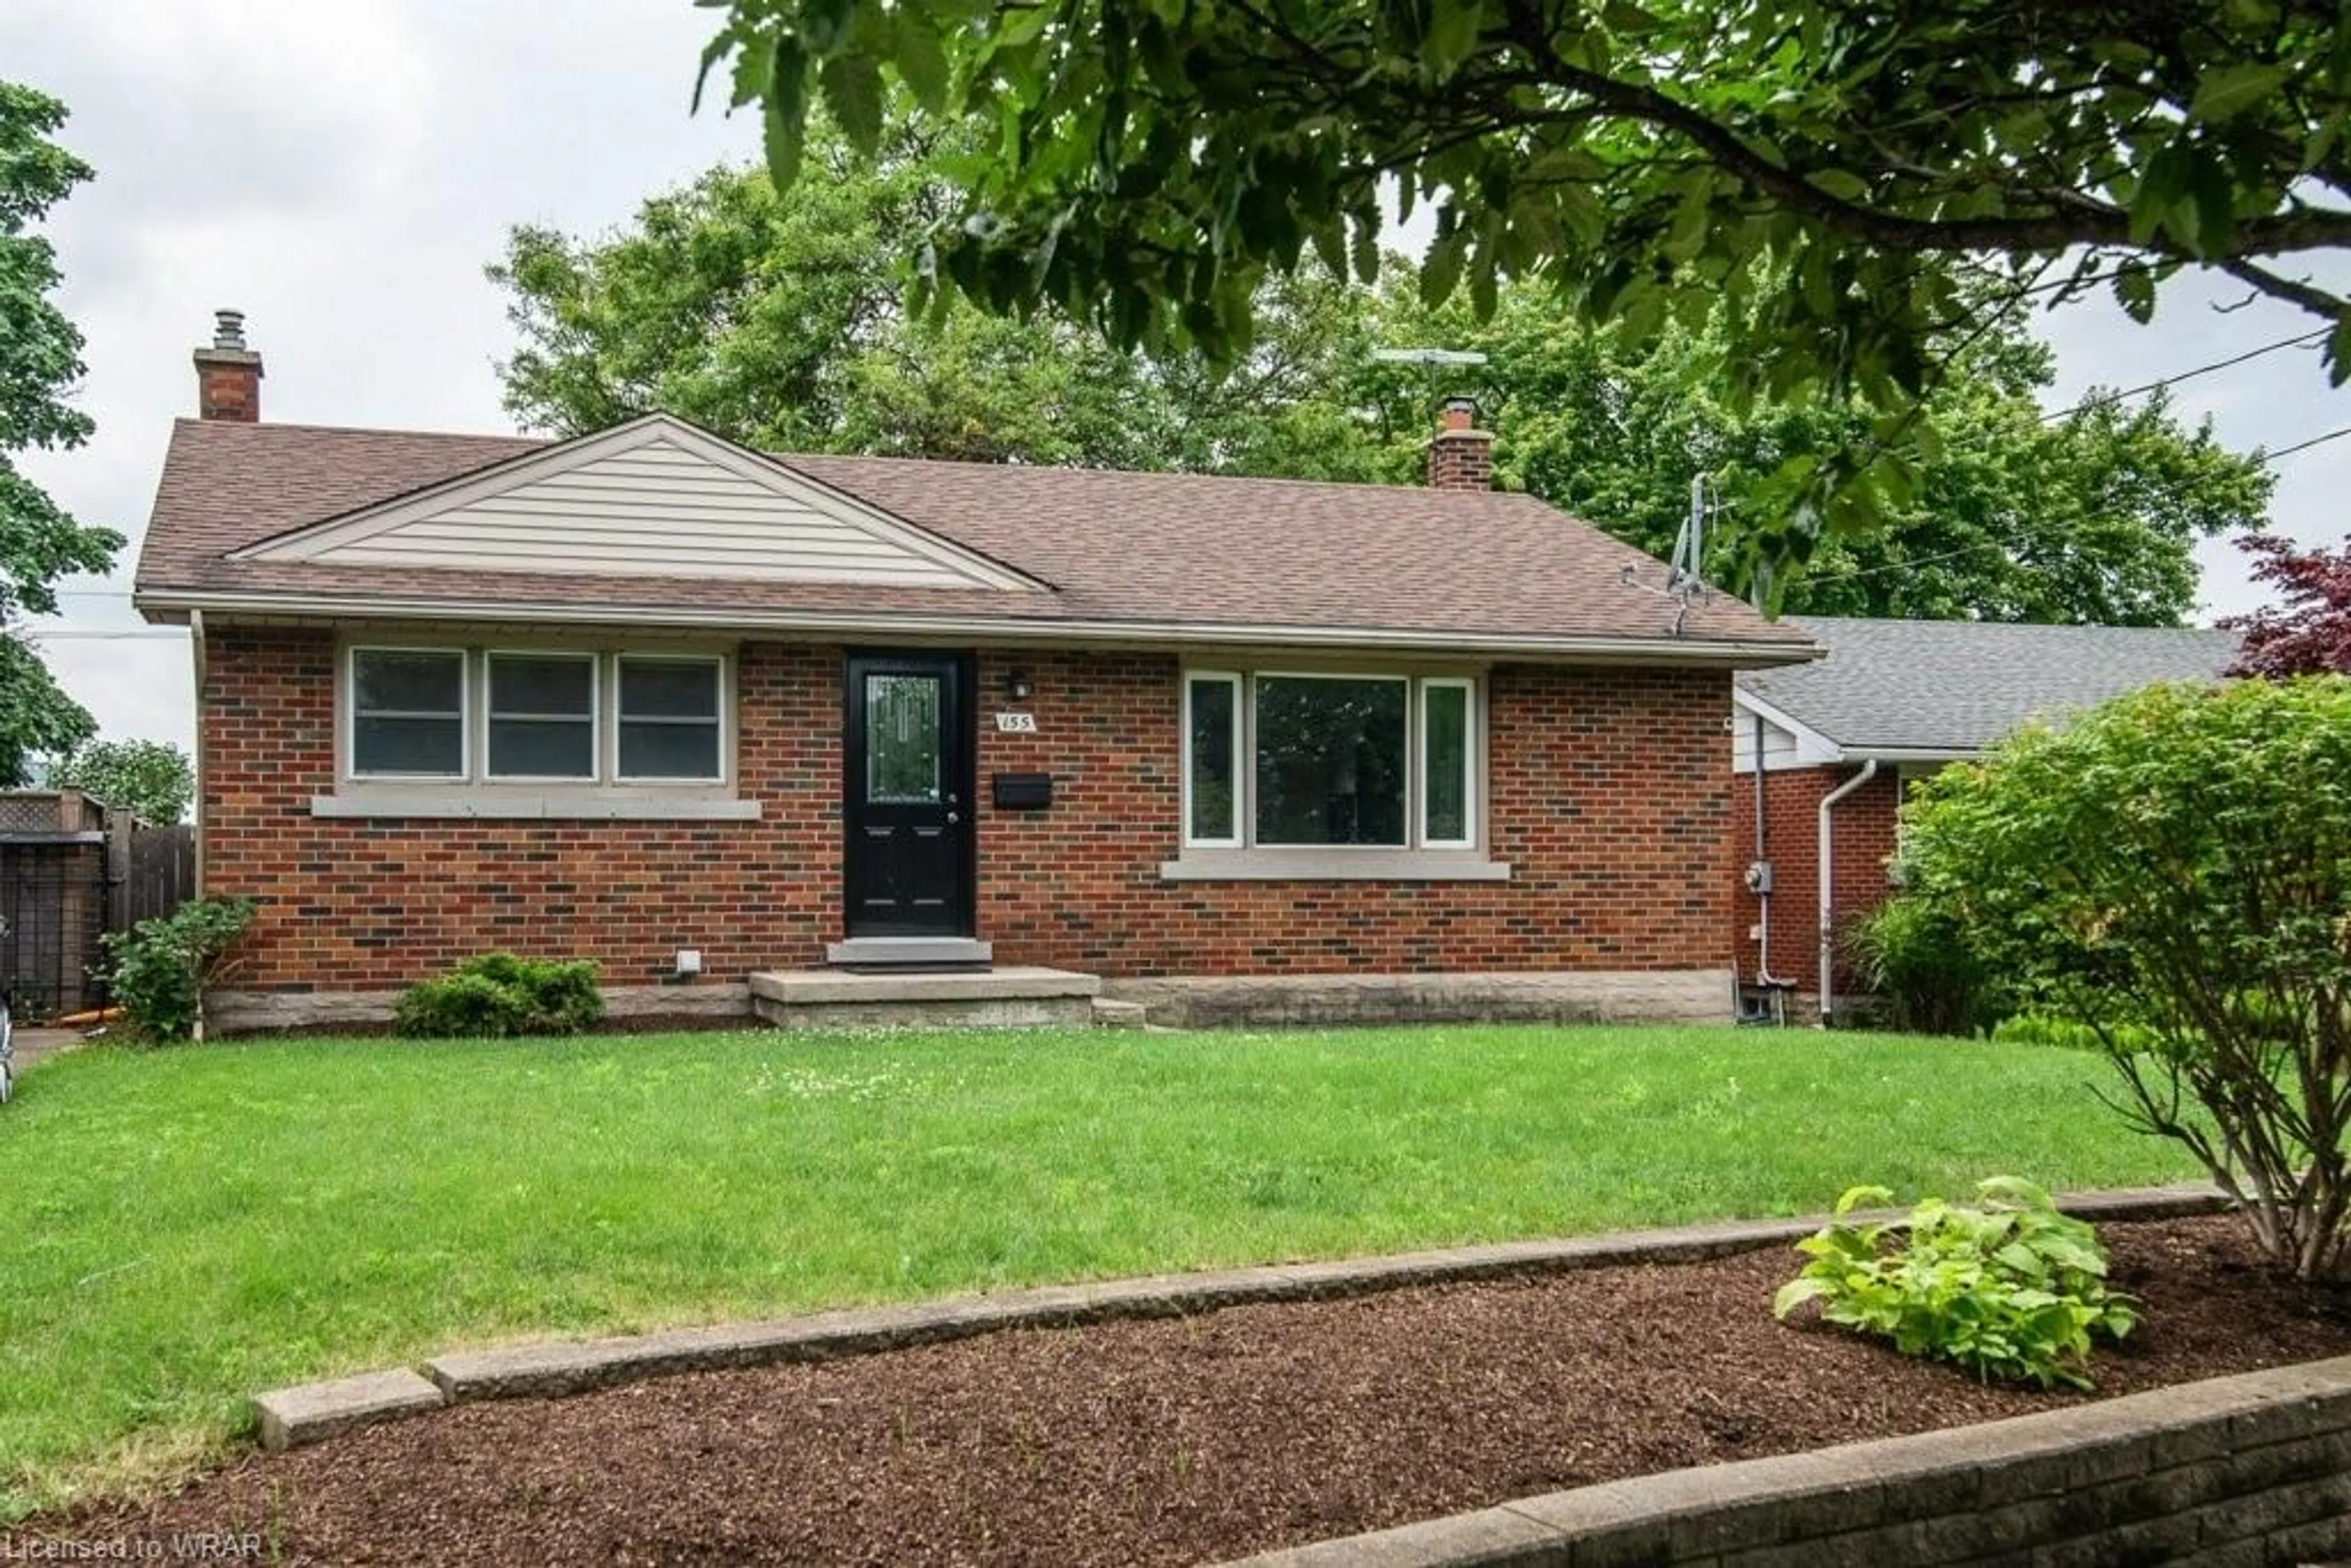 Home with brick exterior material for 155 Oriole St, Waterloo Ontario N2J 3B3